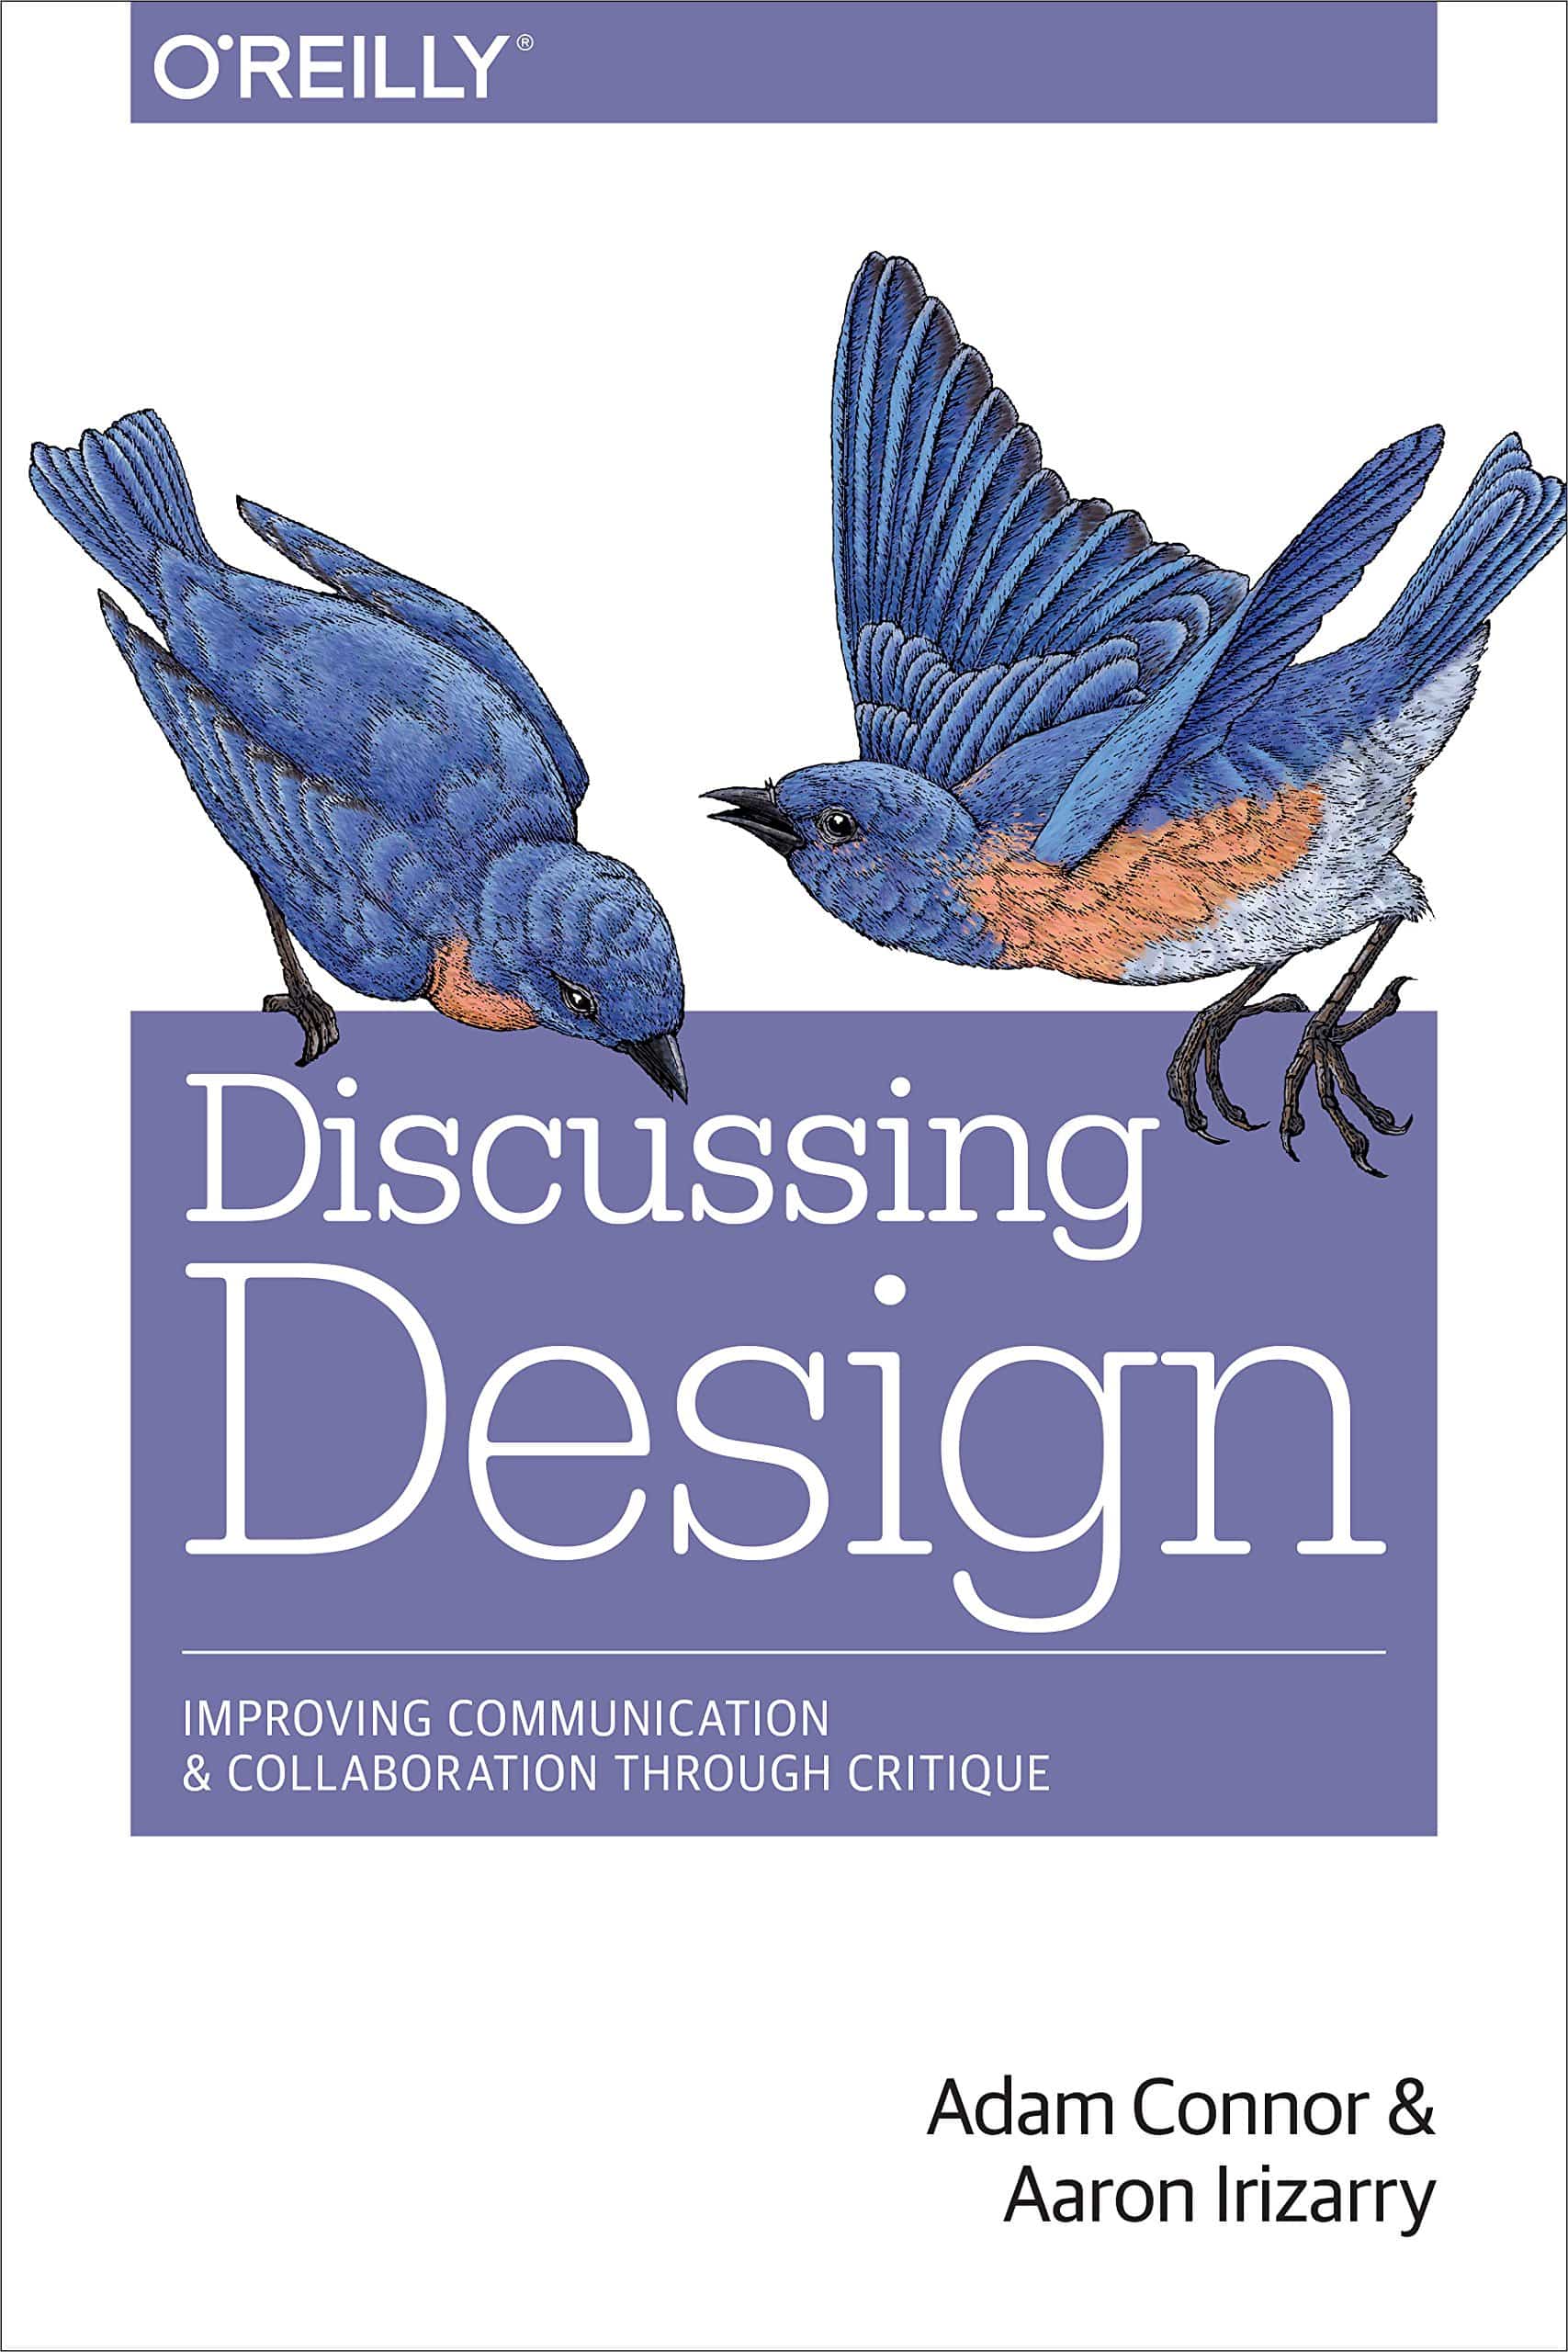 The cover of Discussing Design